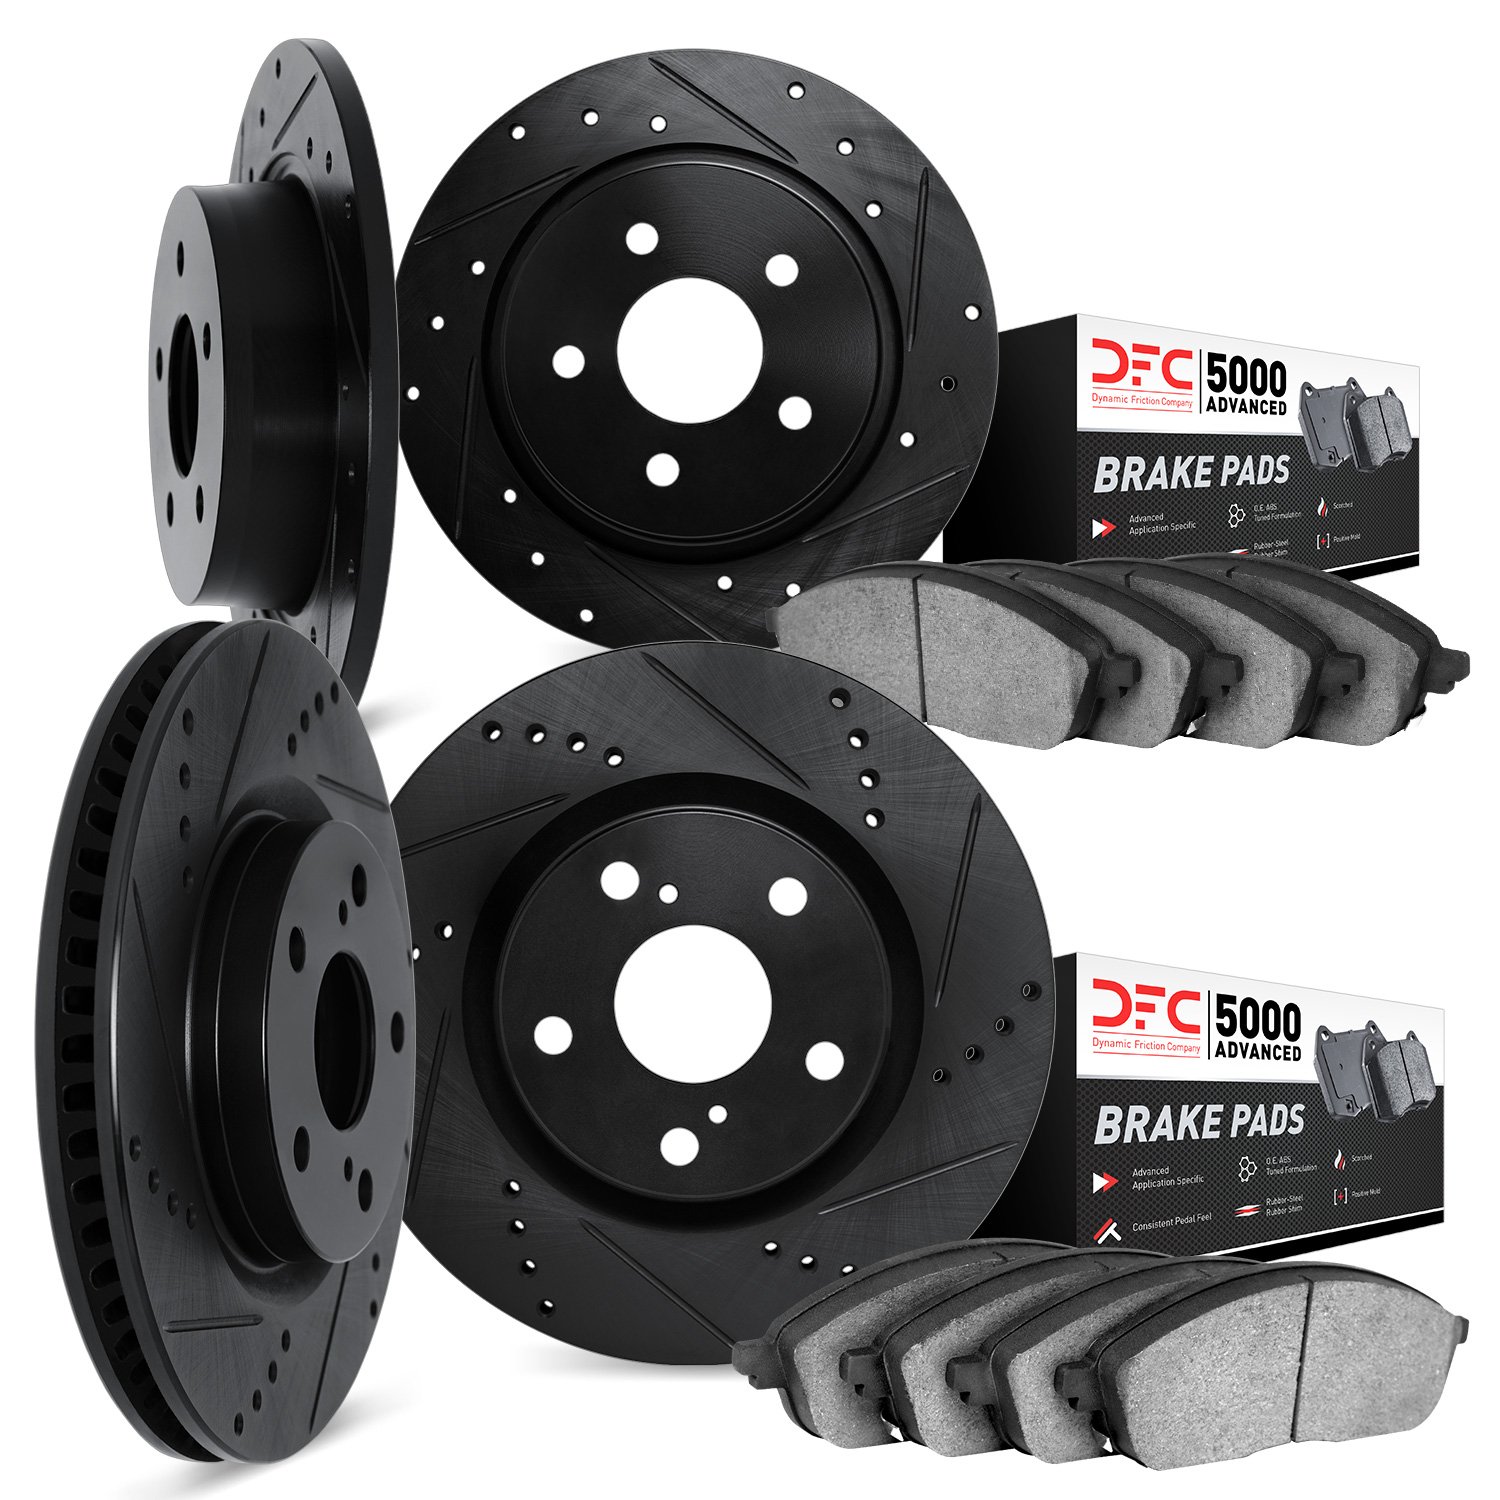 8504-42052 Drilled/Slotted Brake Rotors w/5000 Advanced Brake Pads Kit [Black], Fits Select Mopar, Position: Front and Rear